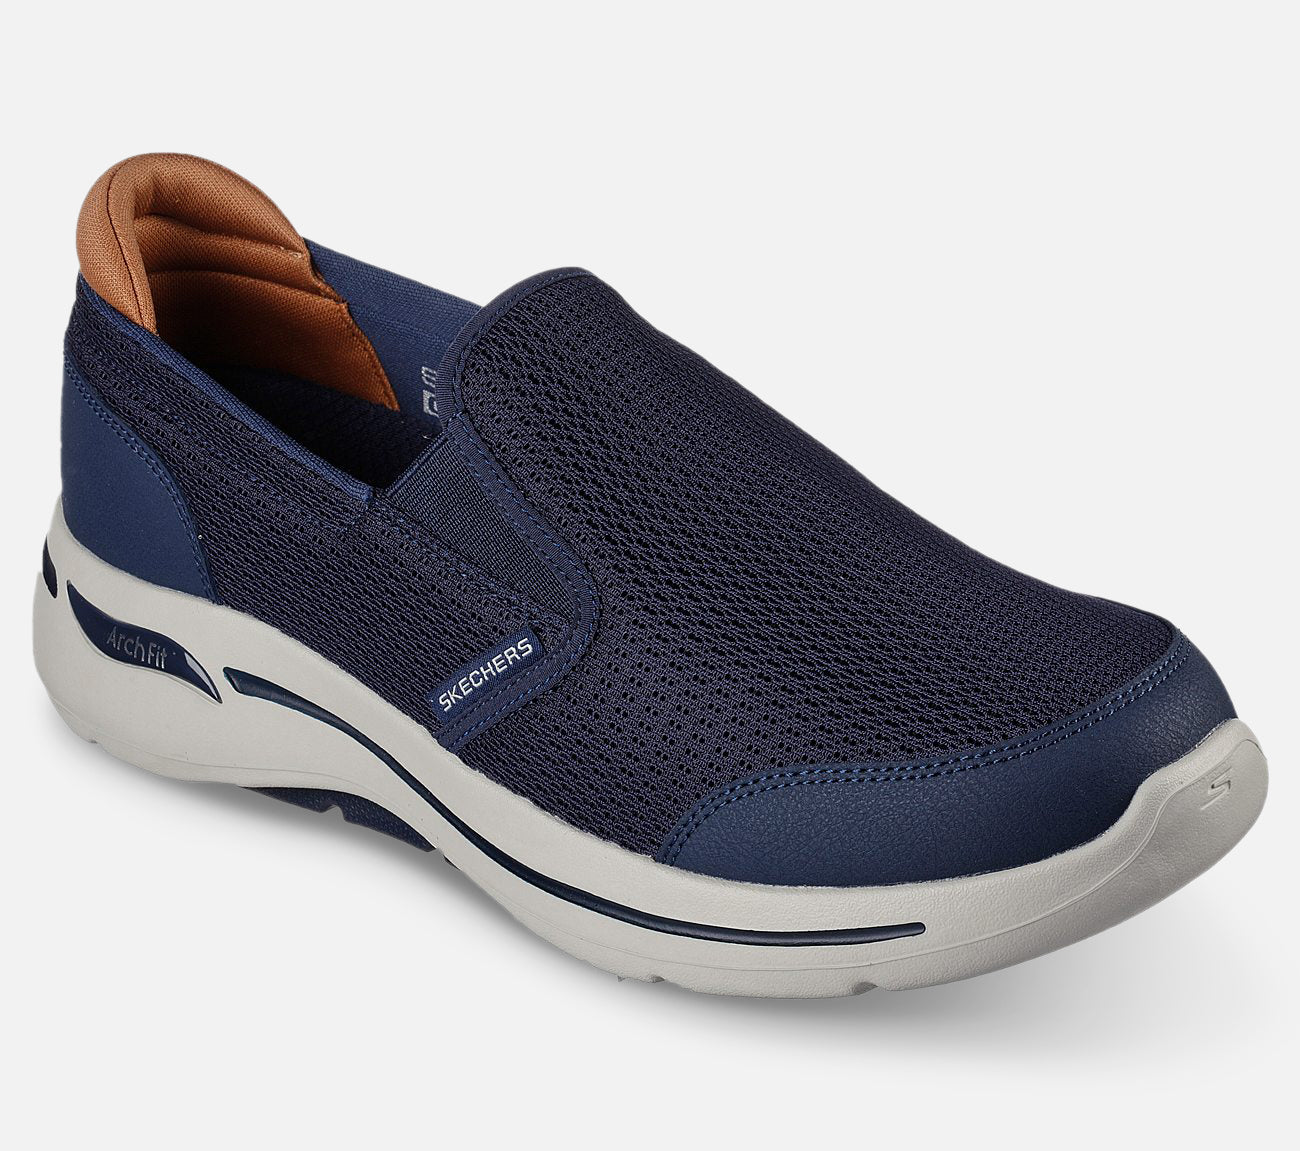 GO WALK Arch Fit - Robust Comfort